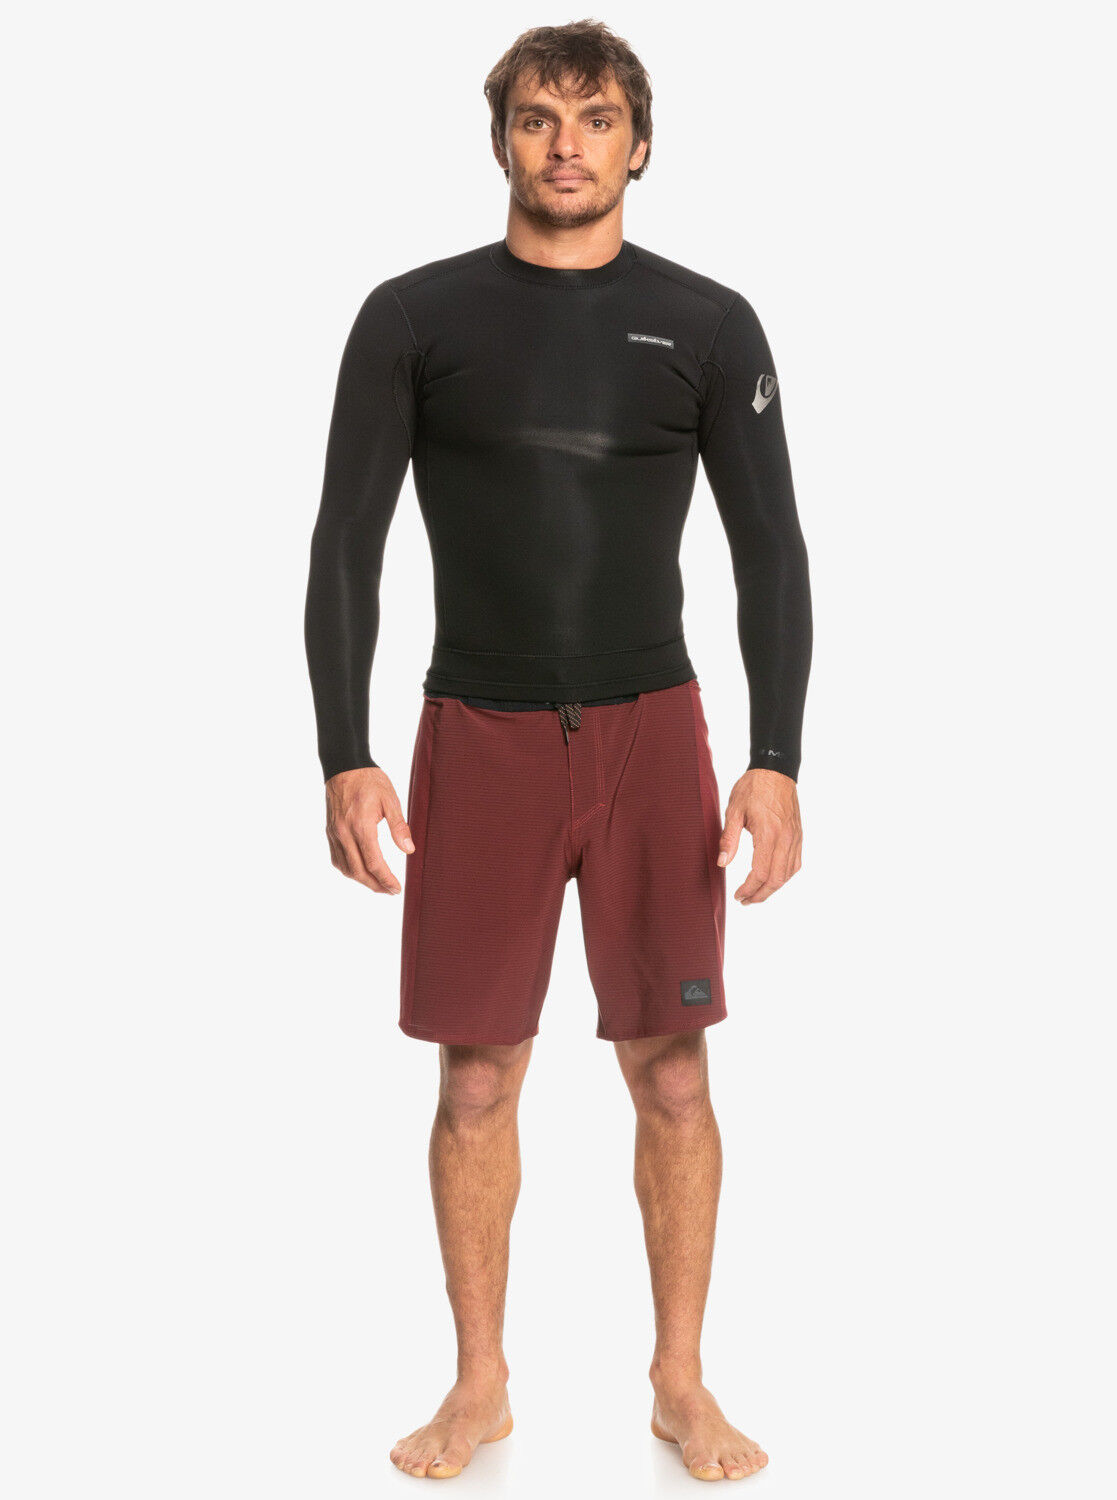 Quiksilver 2mm Everyday Sessions Top - Mute da surf - Uomo | Hardloop